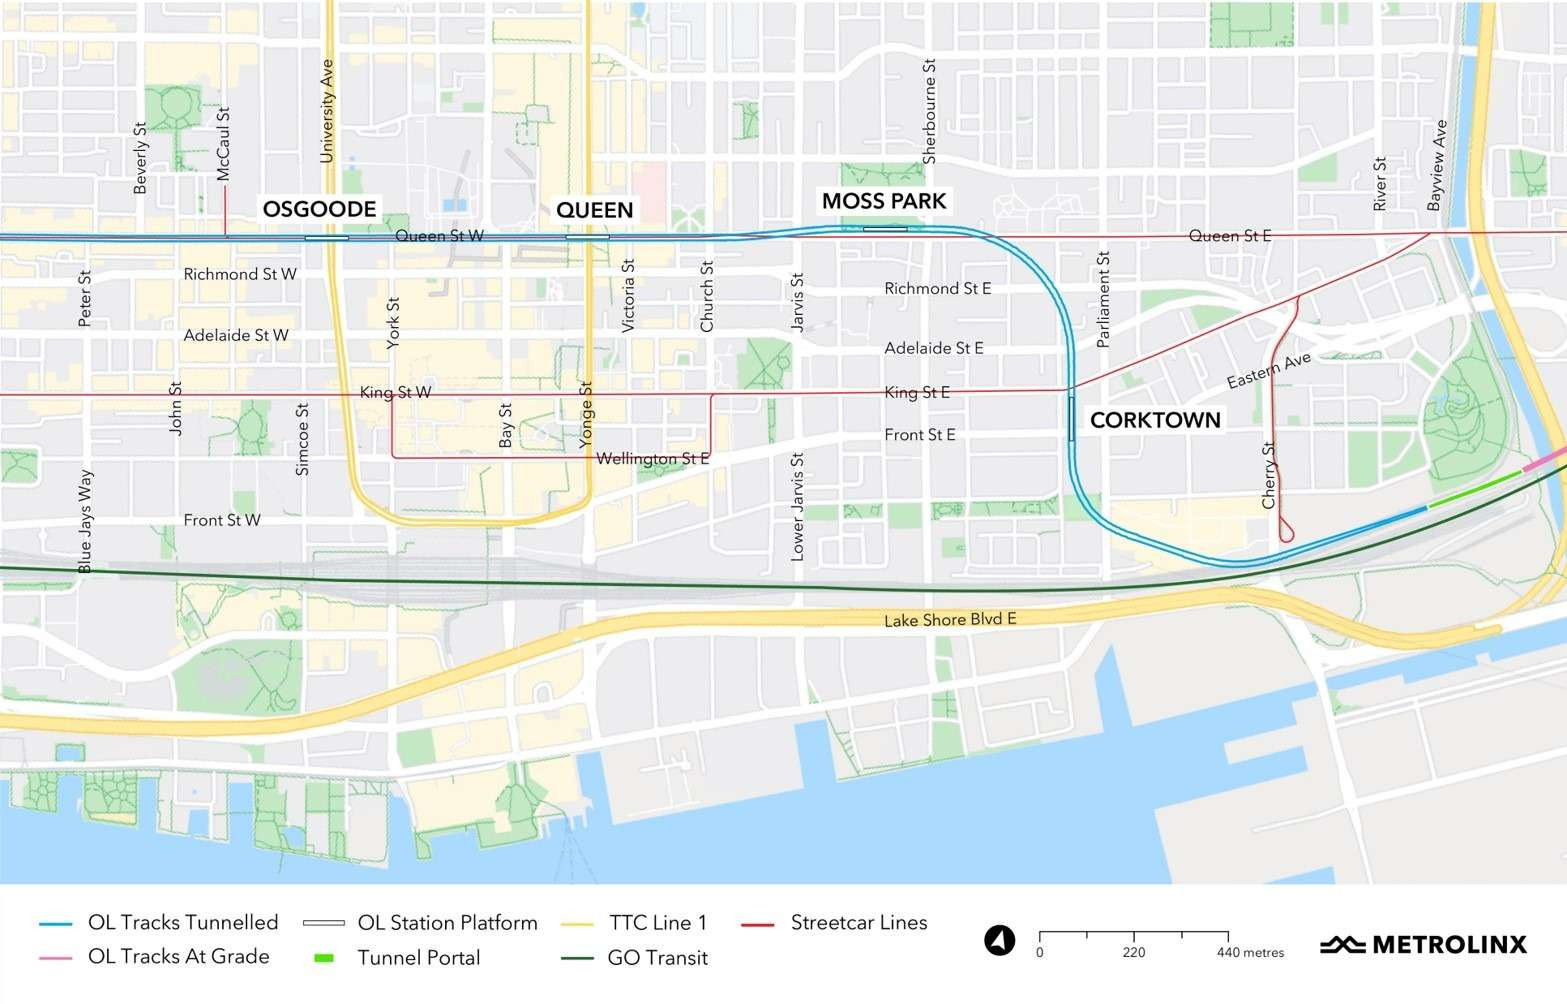 Ontario Line downtown segment overview